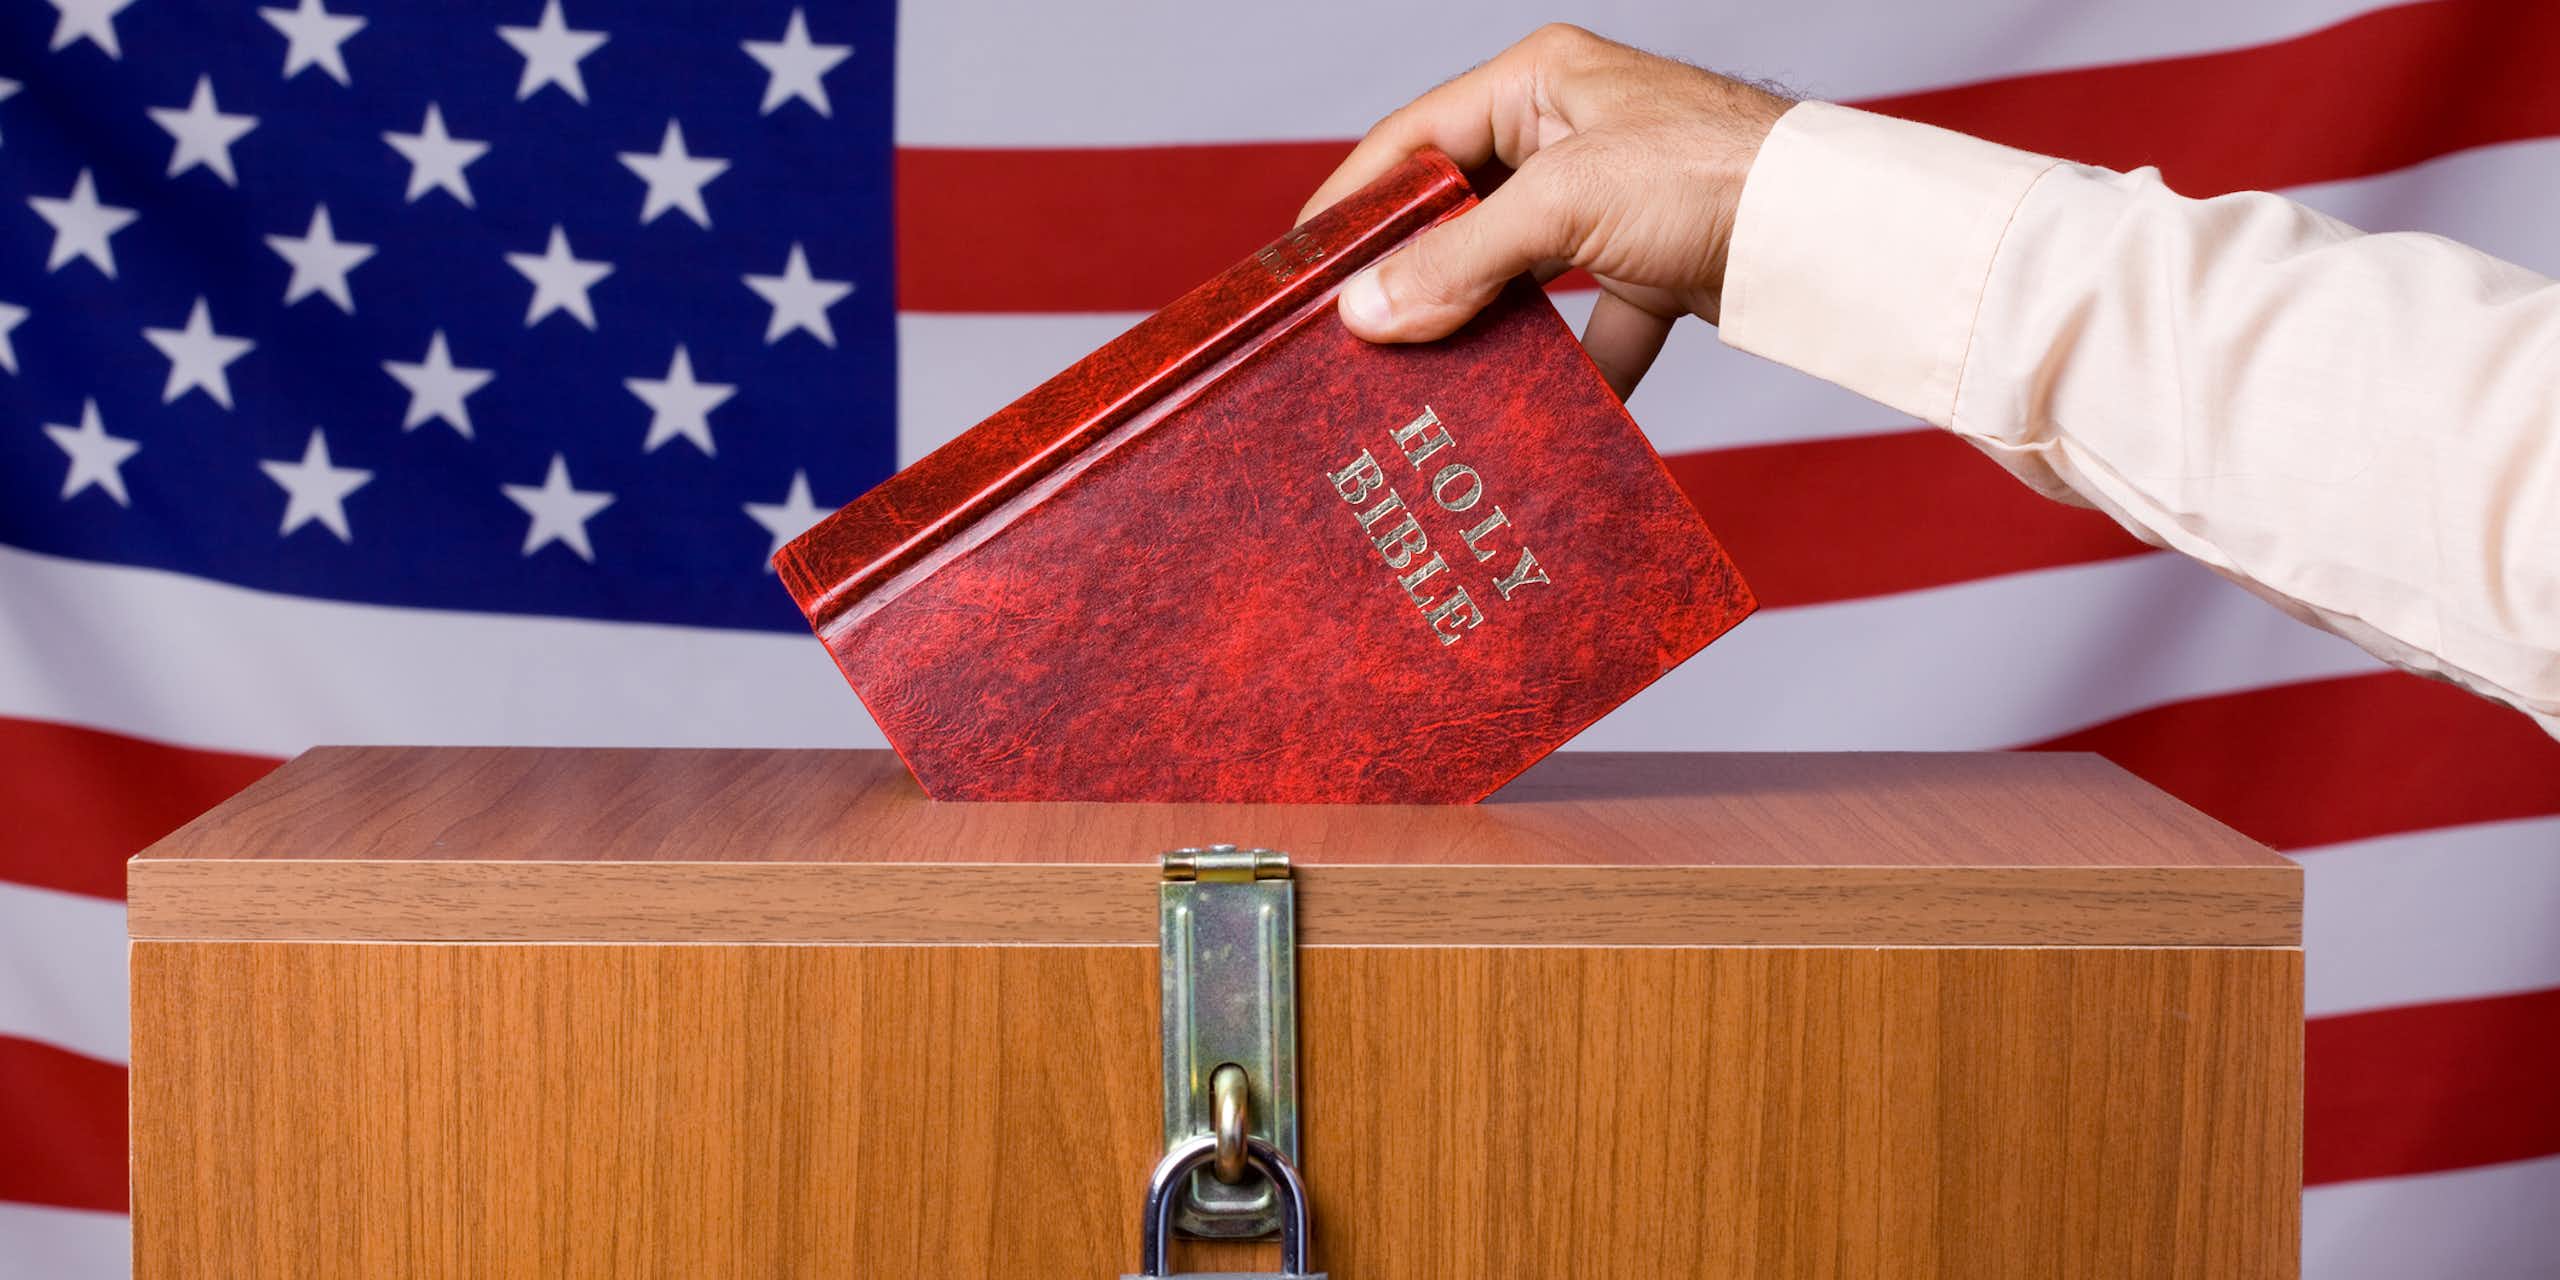 A hand puts a Bible into a locked box in front of a U.S. flag.